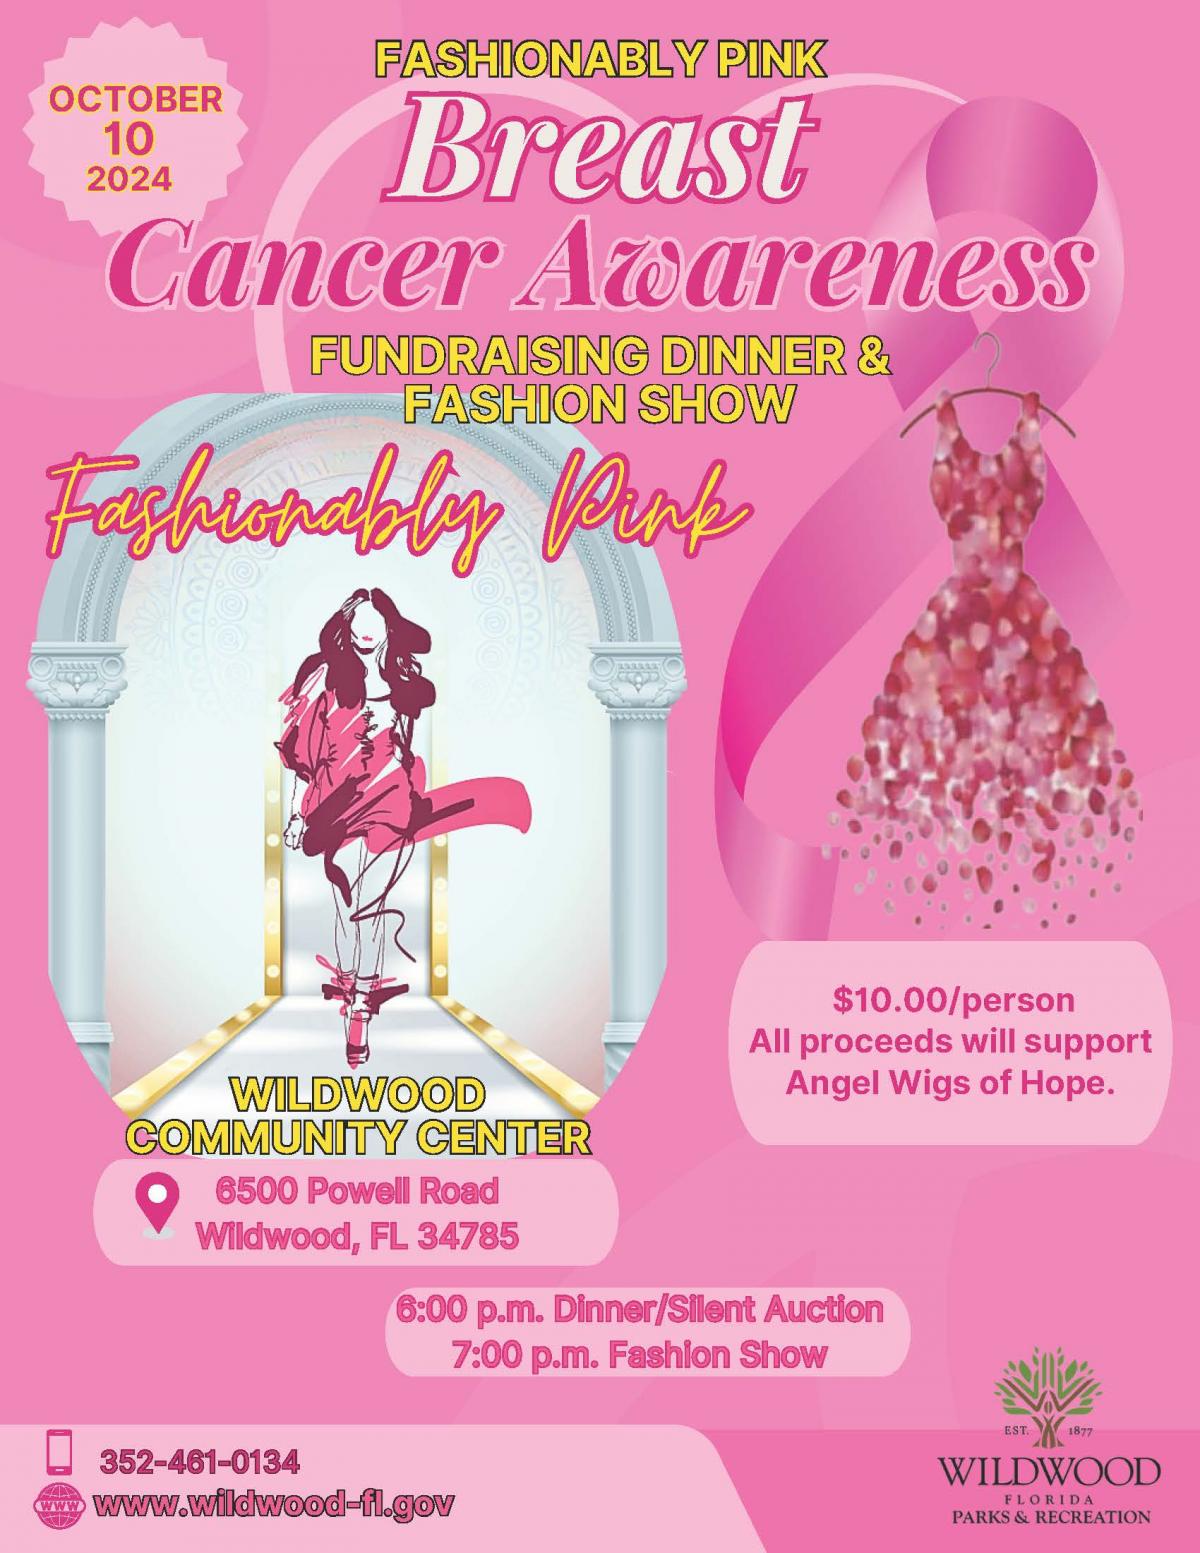 Fashionably Pink Breast Cancer Awareness Fashion Show, Wildwood Community Center 6500 Powell Road Wildwood, Fl 34785,6-9 p.m.